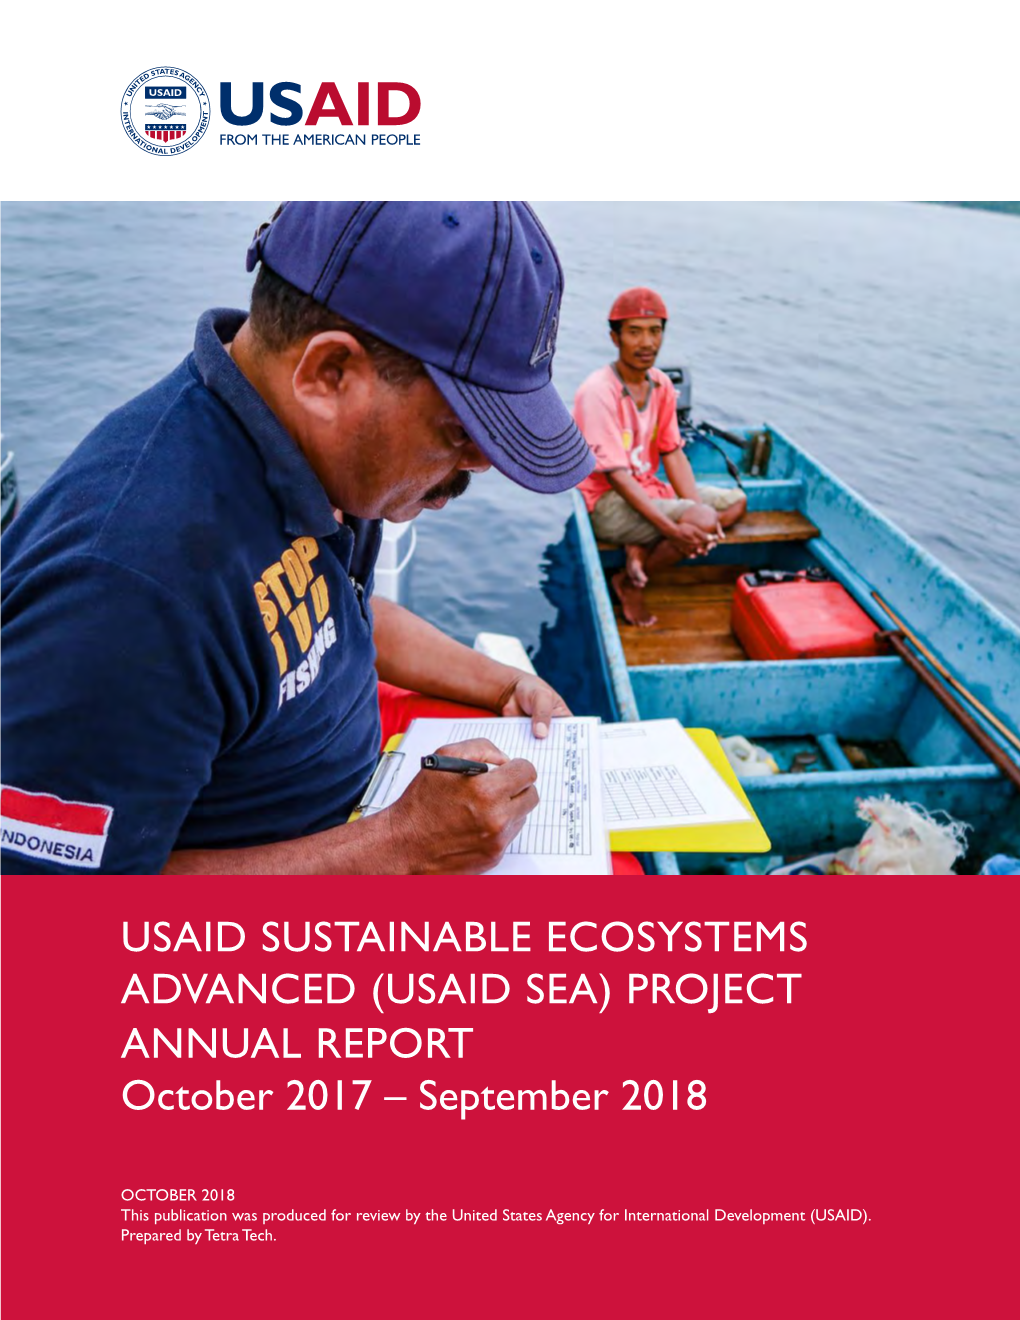 (USAID SEA) PROJECT ANNUAL REPORT October 2017 – September 2018